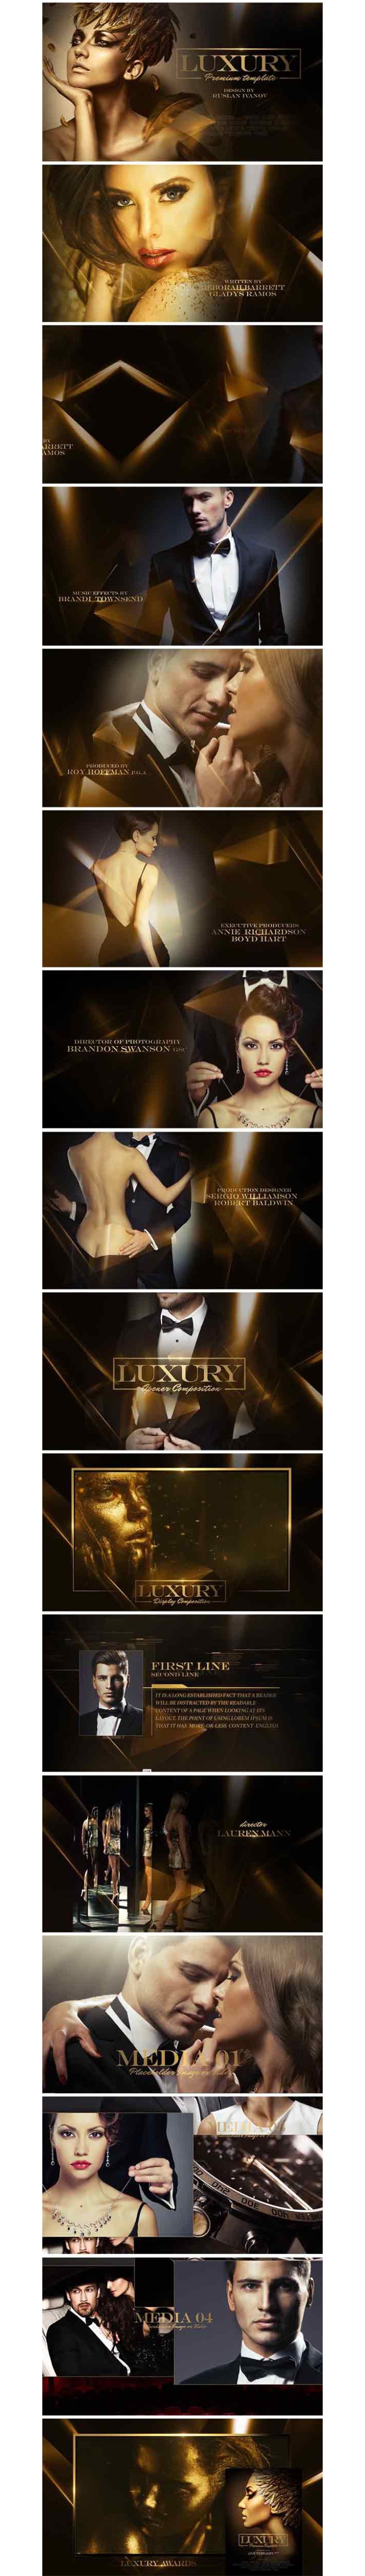 videohive_luxury_awards_package_19383361